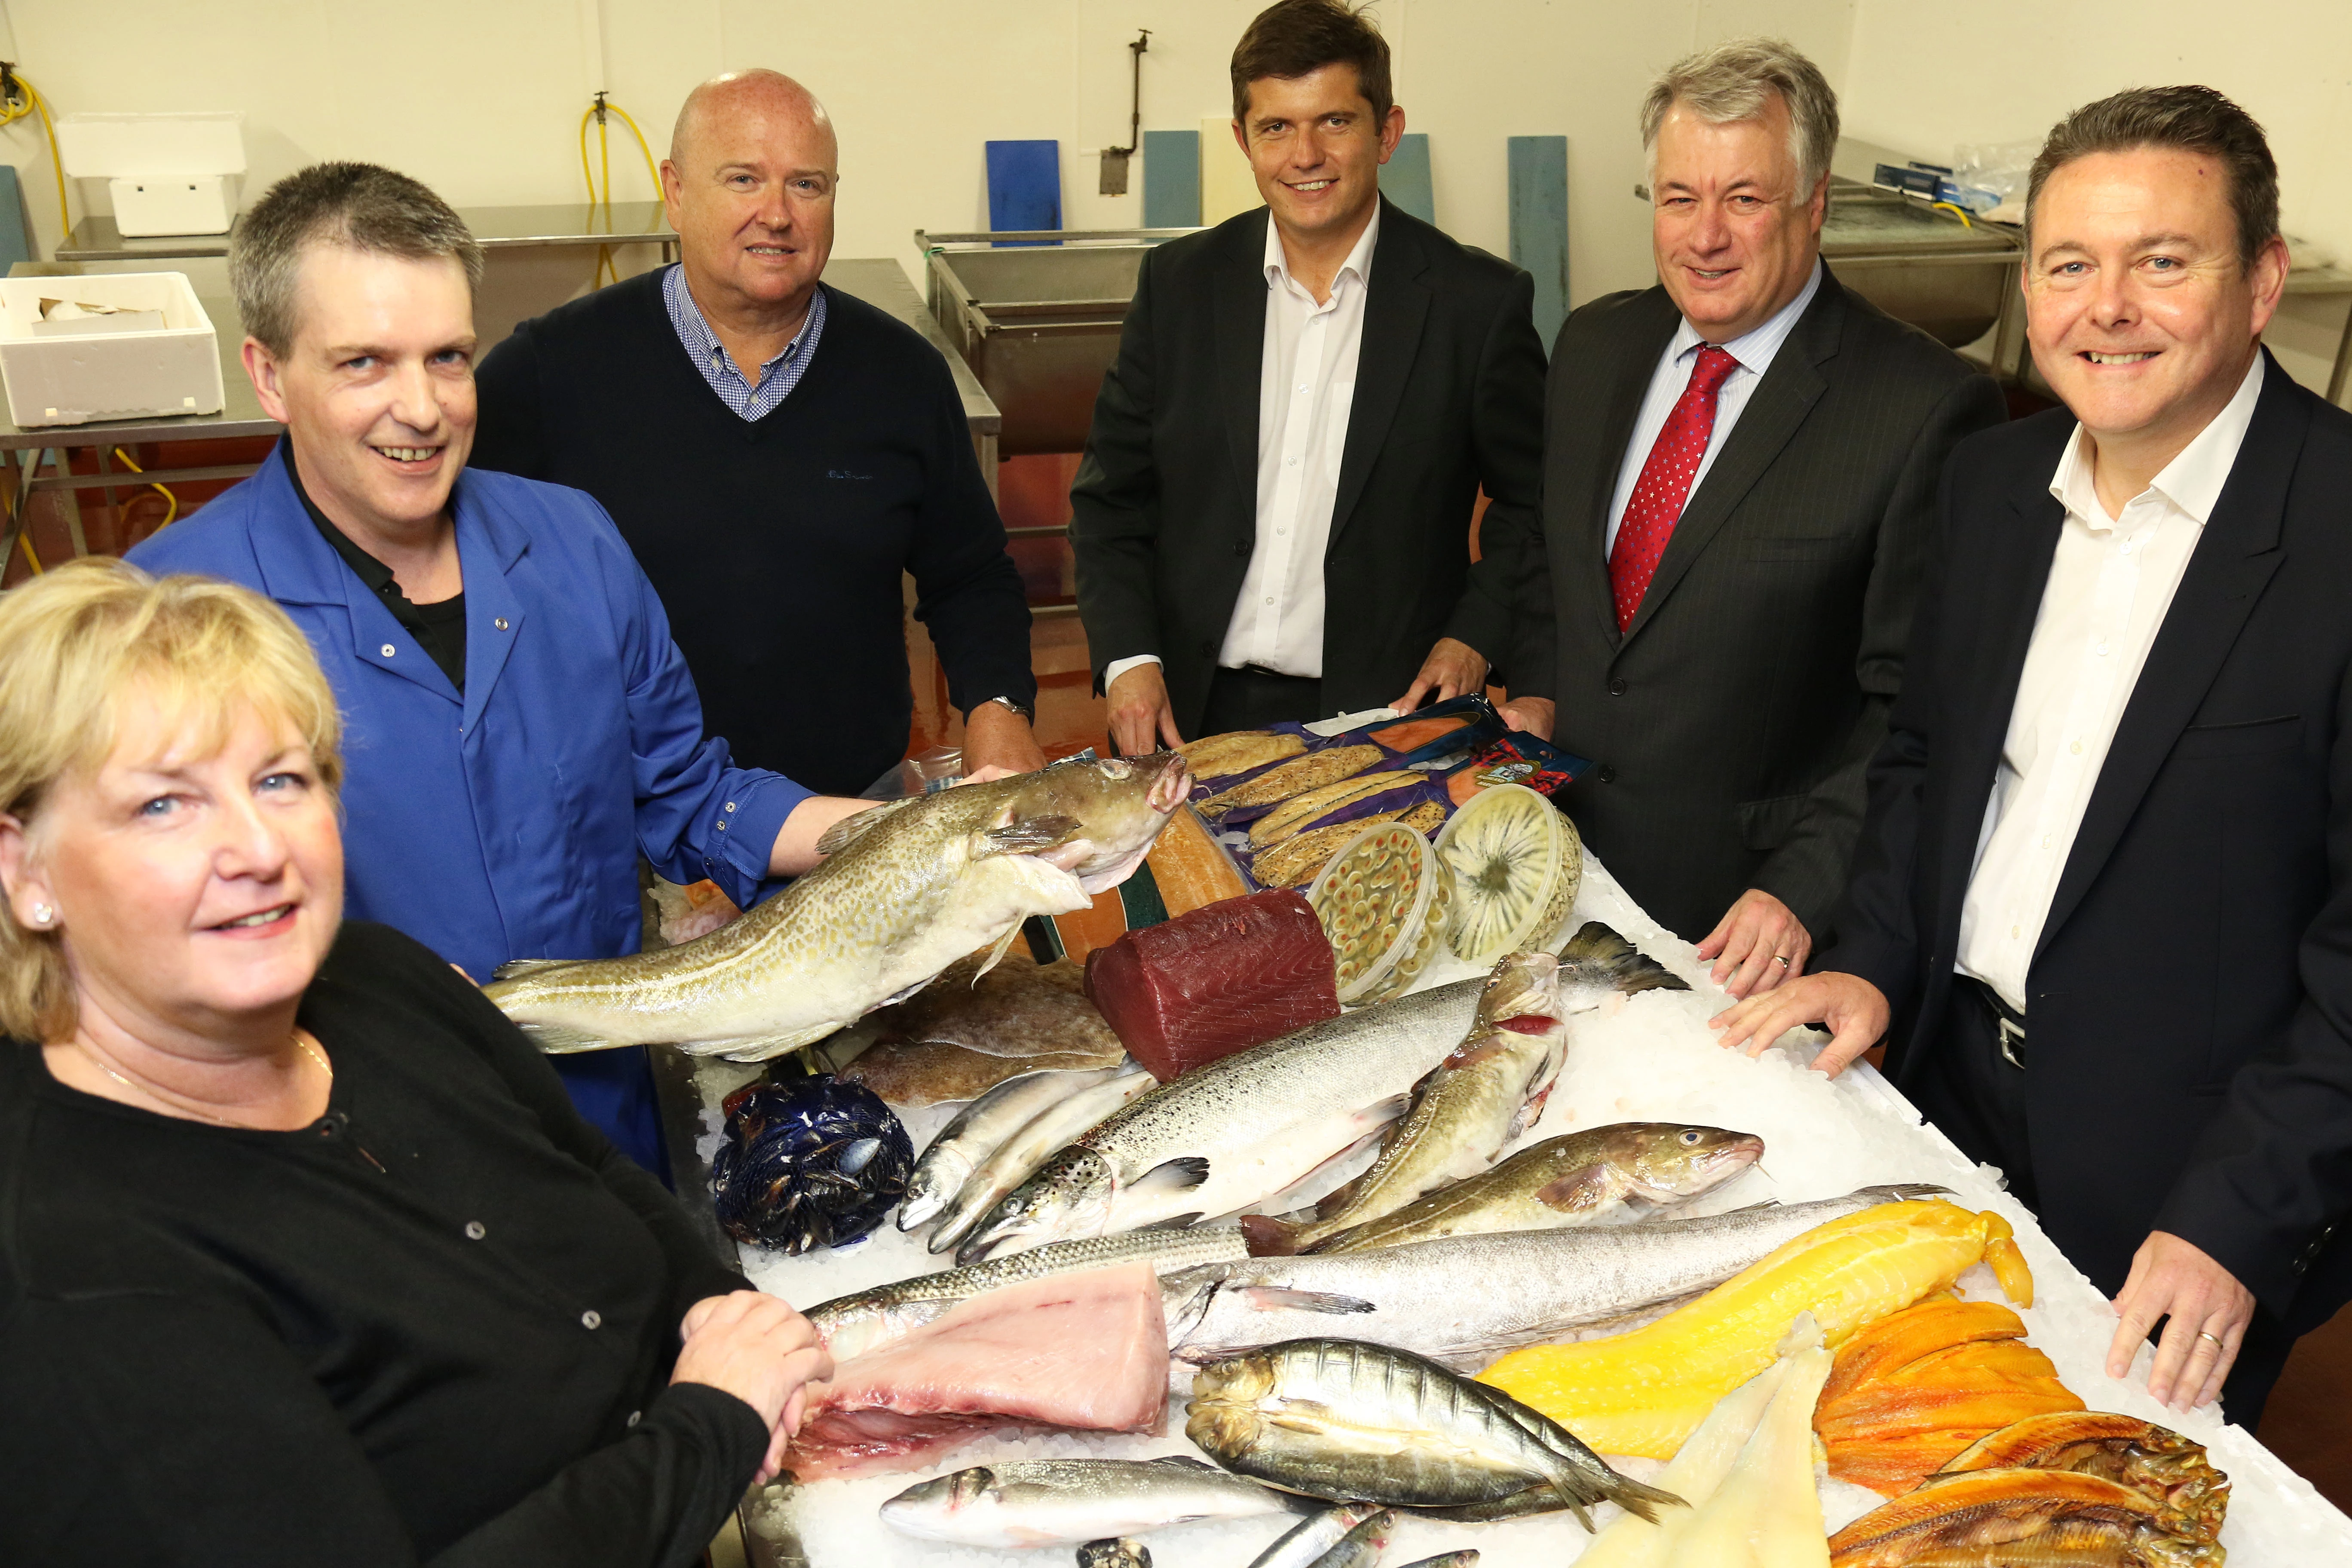 Hazel Cook, Michael Rogerson and Paul Lowery, directors of Inshore Fisheries, with David Wilson of Clive Owen LLP, Keith Charlton, of FW Capital, and Angus Allan, of Clive Owen LLP